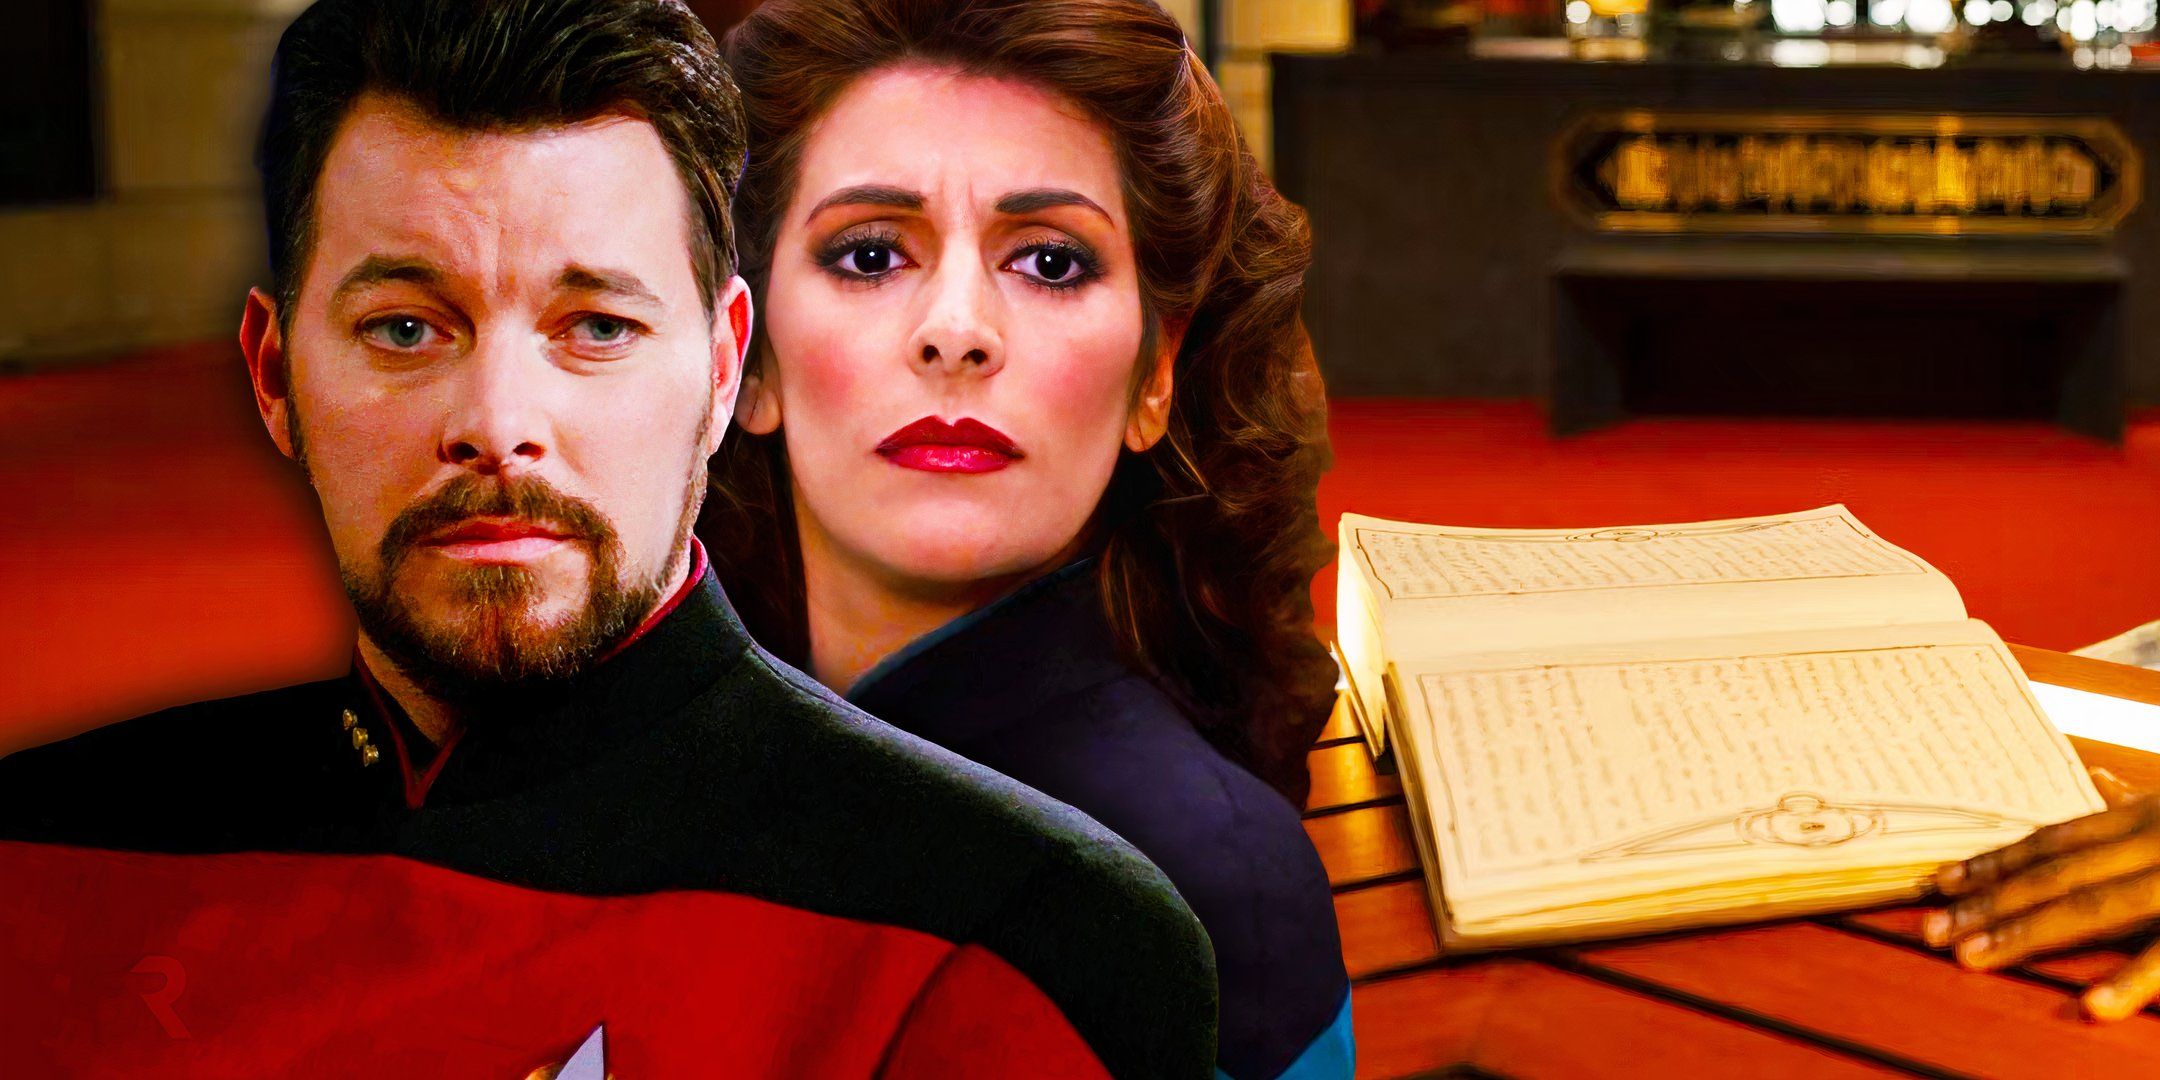 Commander Riker and Counselor Troi in front of Labyrinths of the Mind in Star Trek Discovery